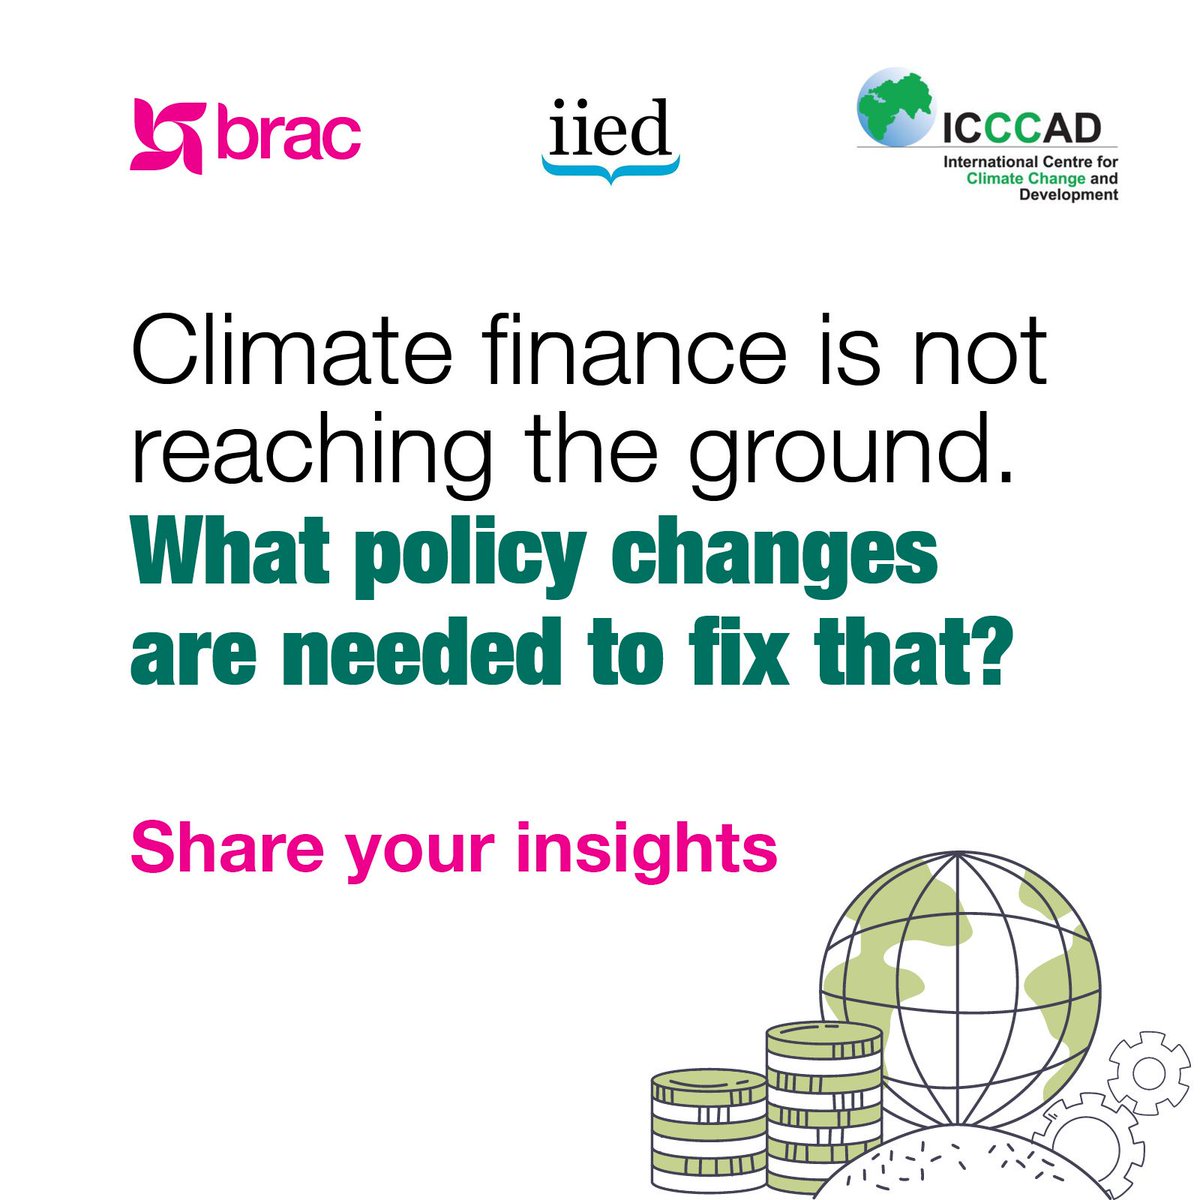 Only 10% of current climate finance has reached the intended, most vulnerable communities. How can we fix this? Share your insights: tinyurl.com/4j5zwamr